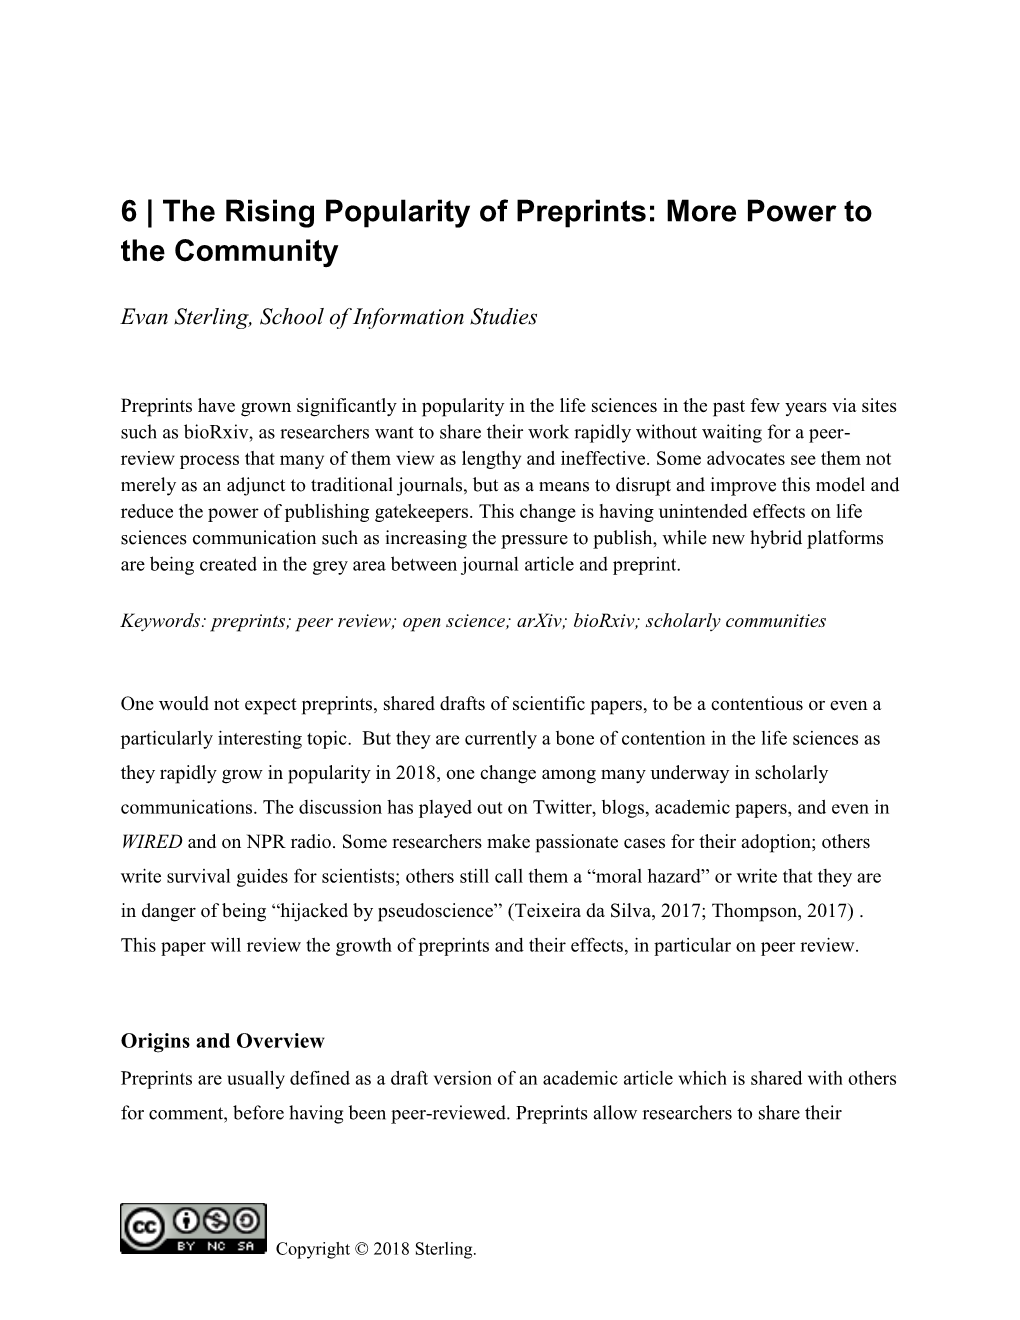 The Rising Popularity of Preprints: More Power to the Community